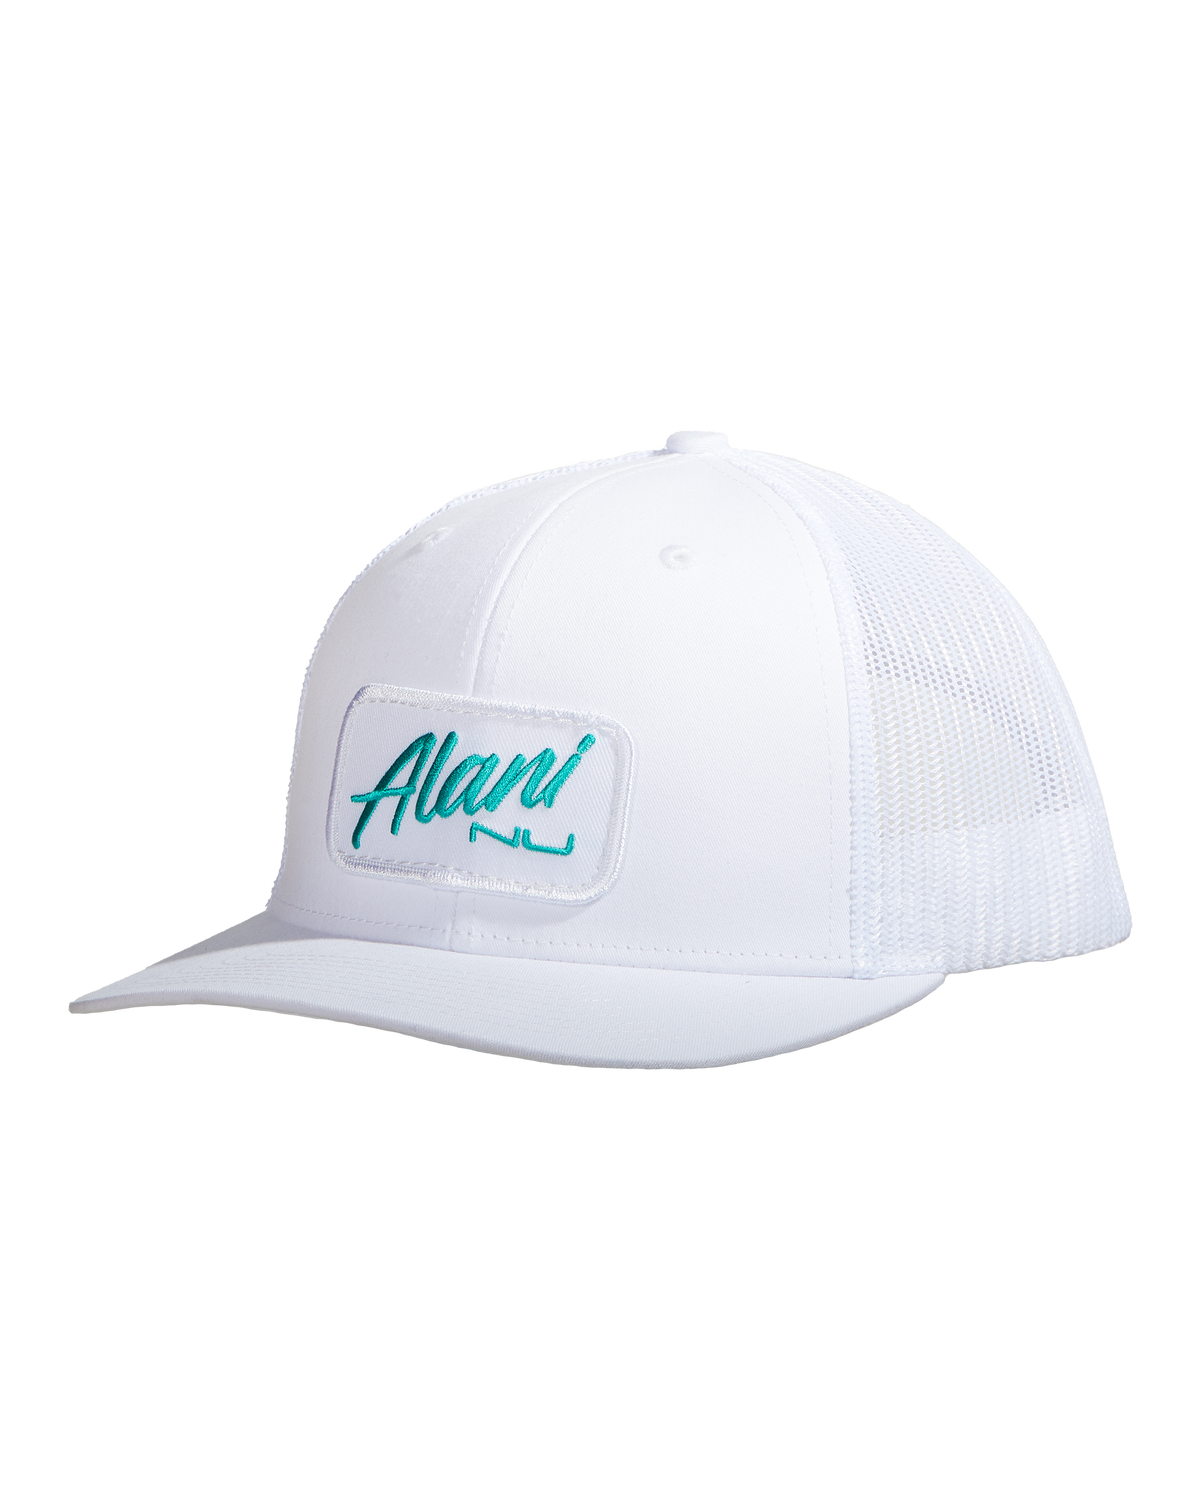 An Alani Nu Patch Hat in White with a green logo.